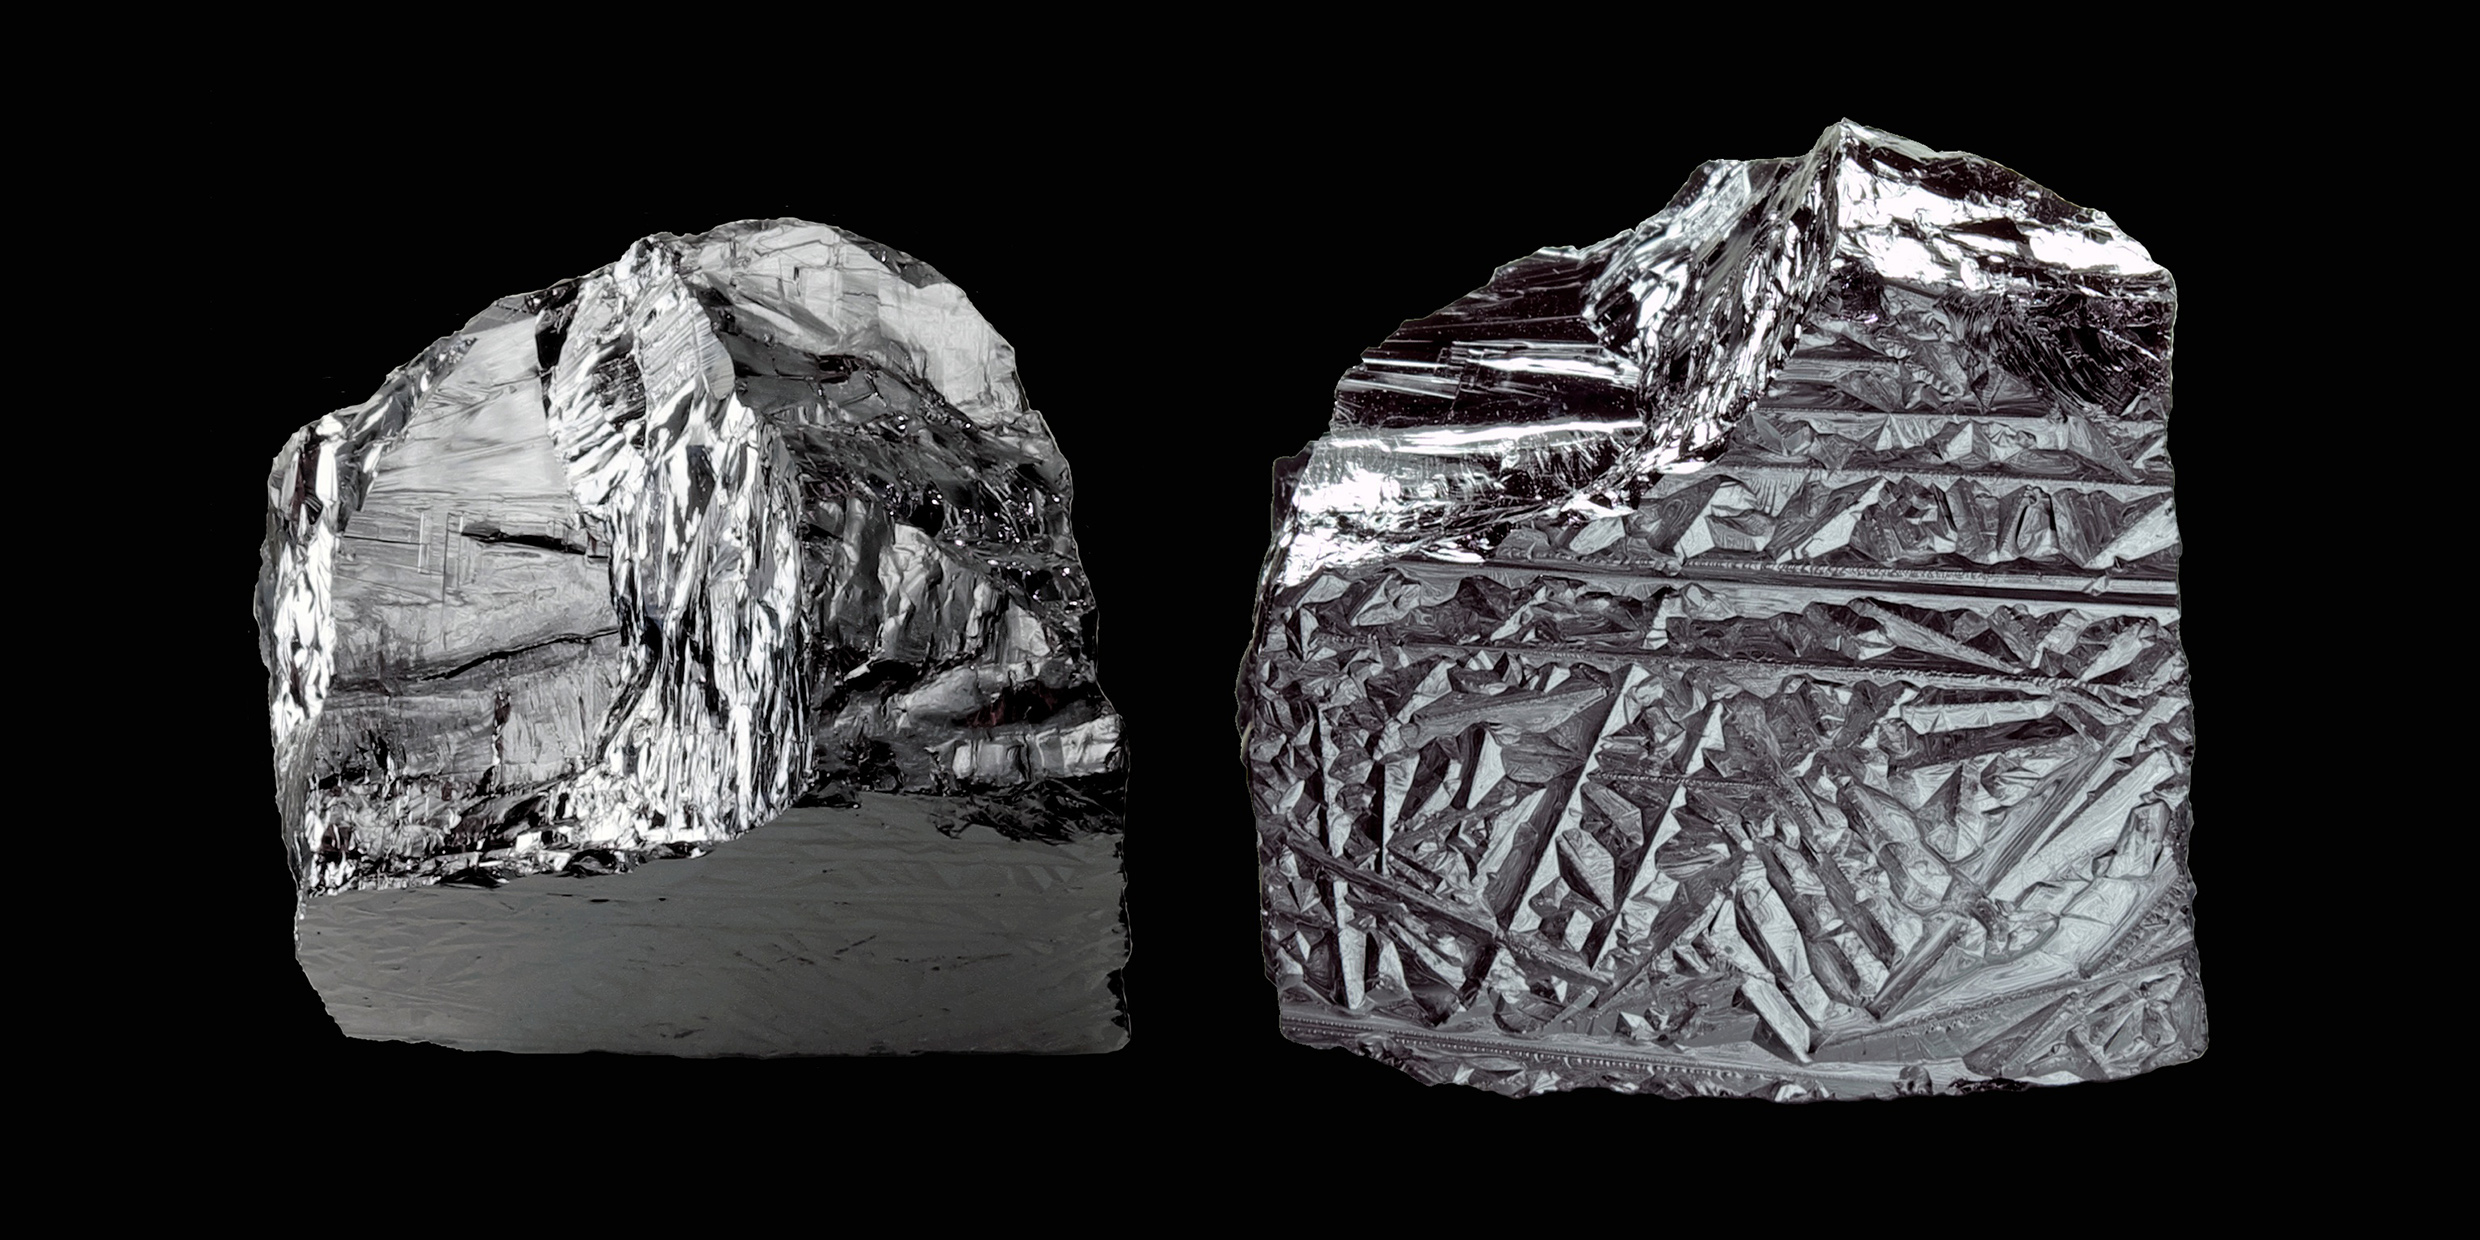 Image of two shiny chunks of silvery metal